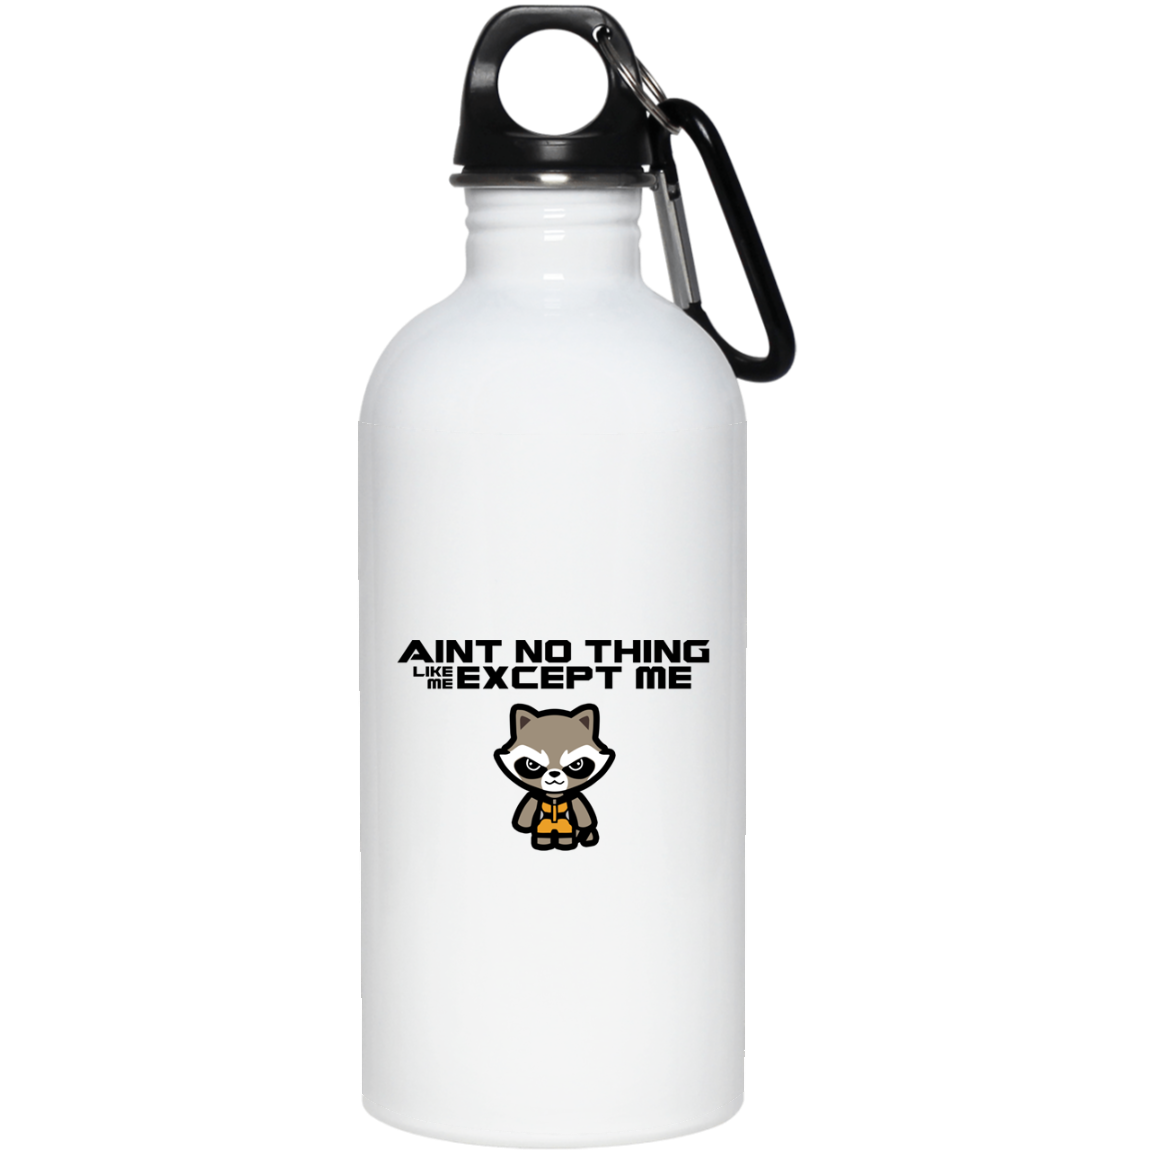 Aint No Thing Like Me Except Me - 20 oz. Stainless Steel Water Bottle